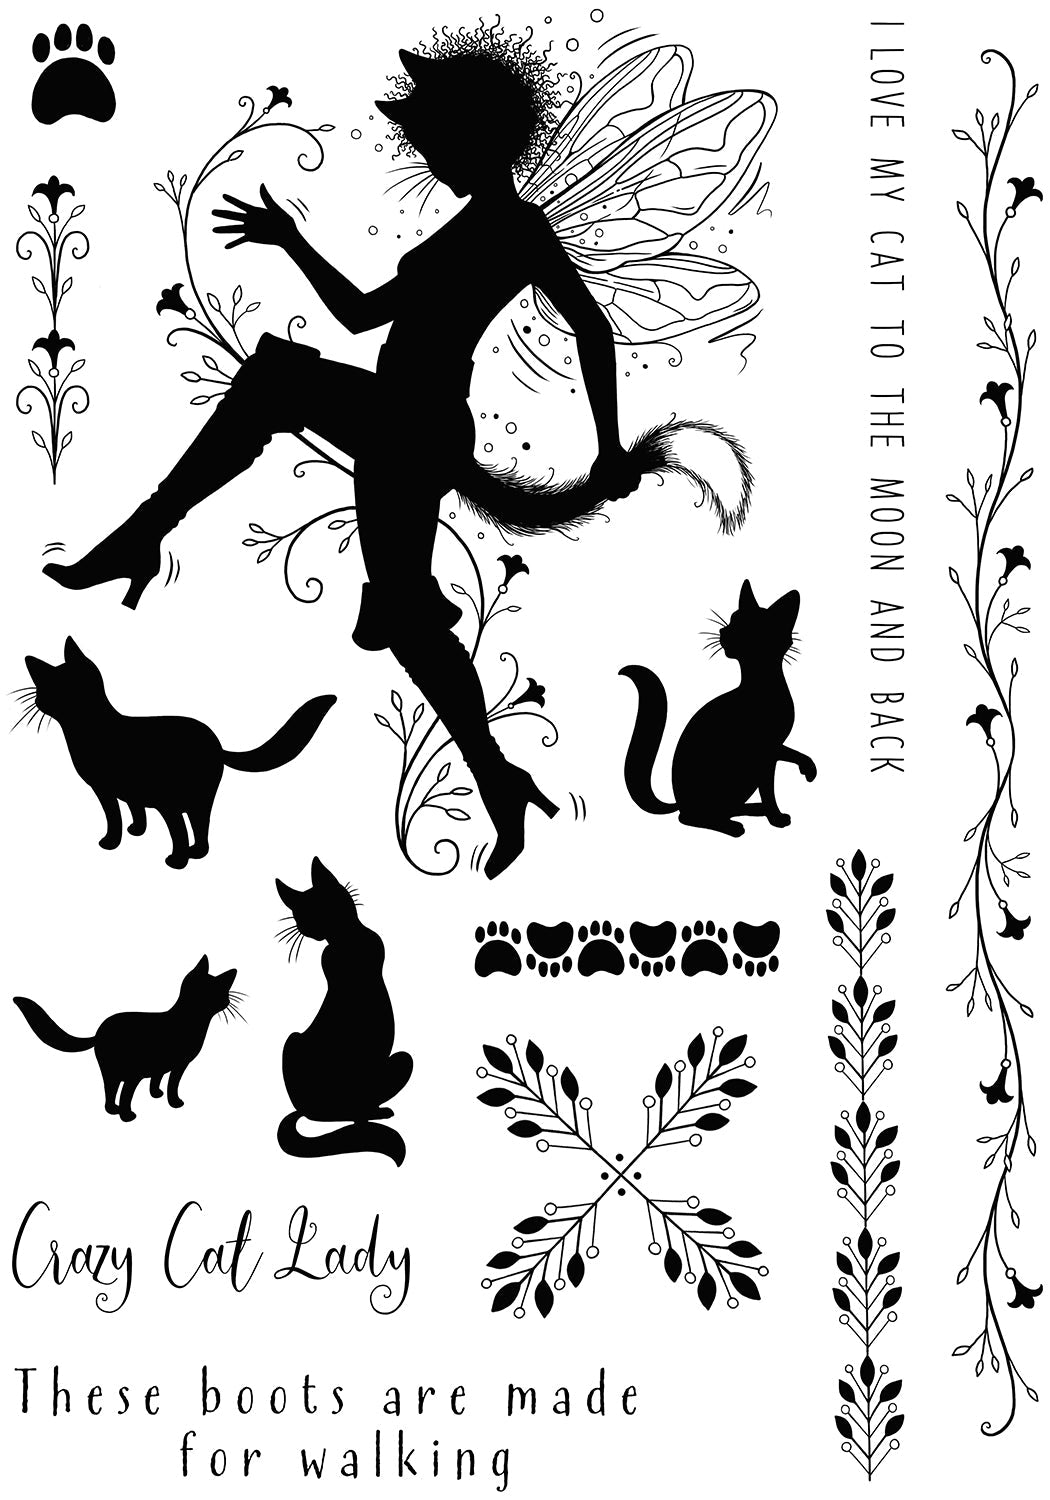 Pink Ink Designs Puss In Boots 6 in x 8 in Clear Stamp Set